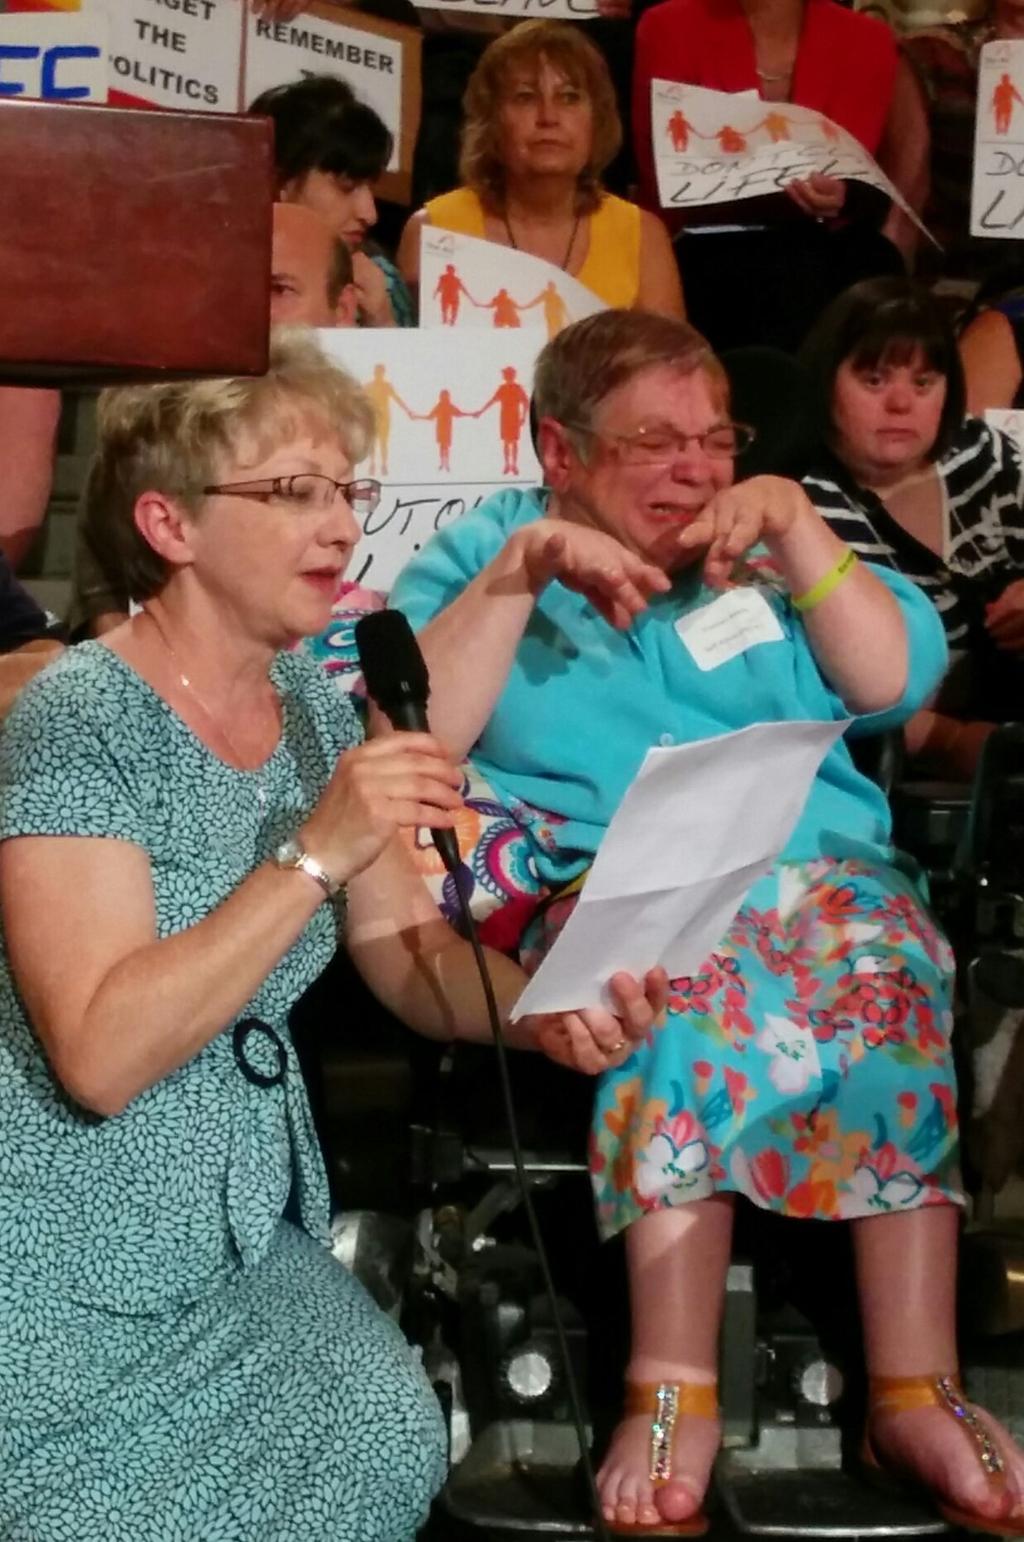 Self Advocacy in Action In June 2016 Frances Keeny spoke at a rally in Harrisburg. She told legislators and people at the rally about her life.